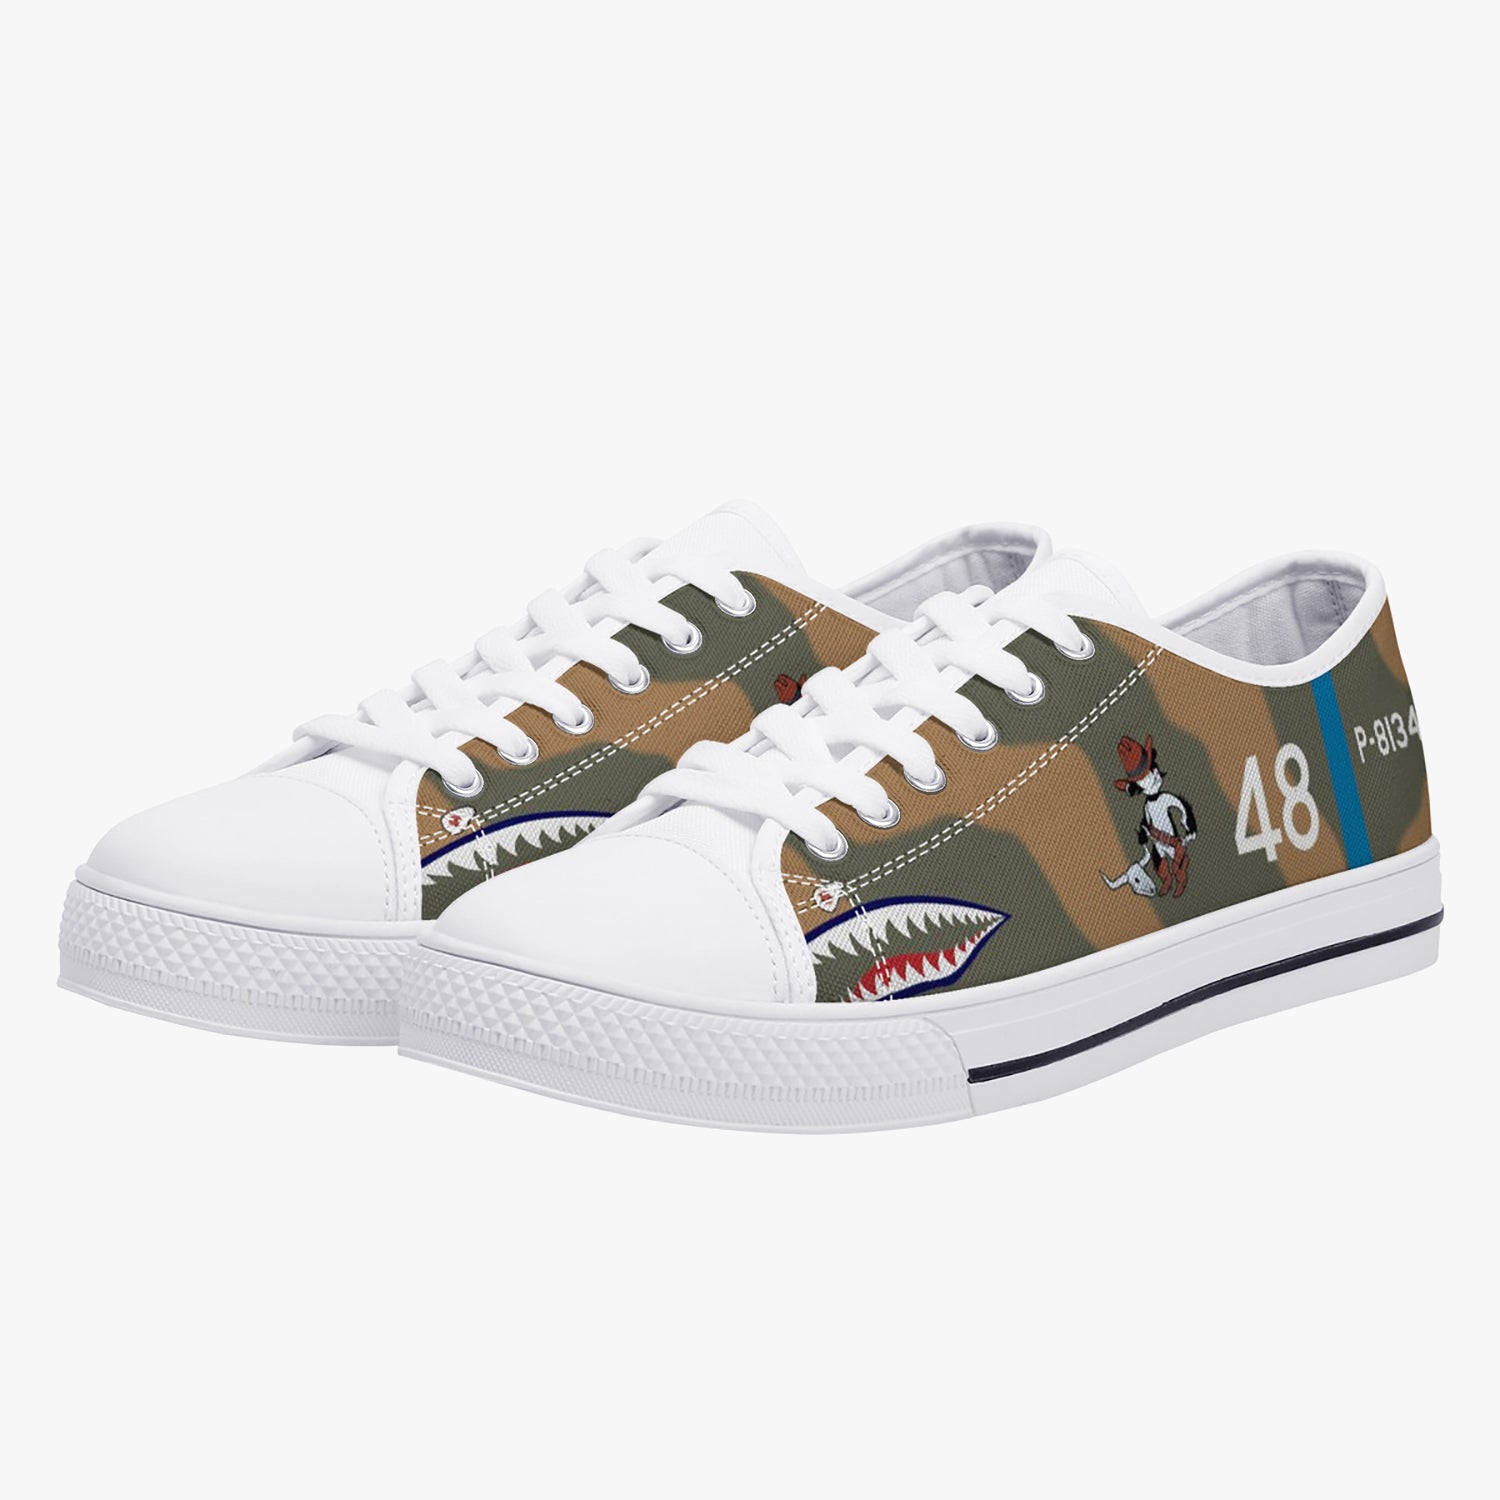 P-40 "White #48" of Tex Hill Low Top Canvas Shoes - I Love a Hangar